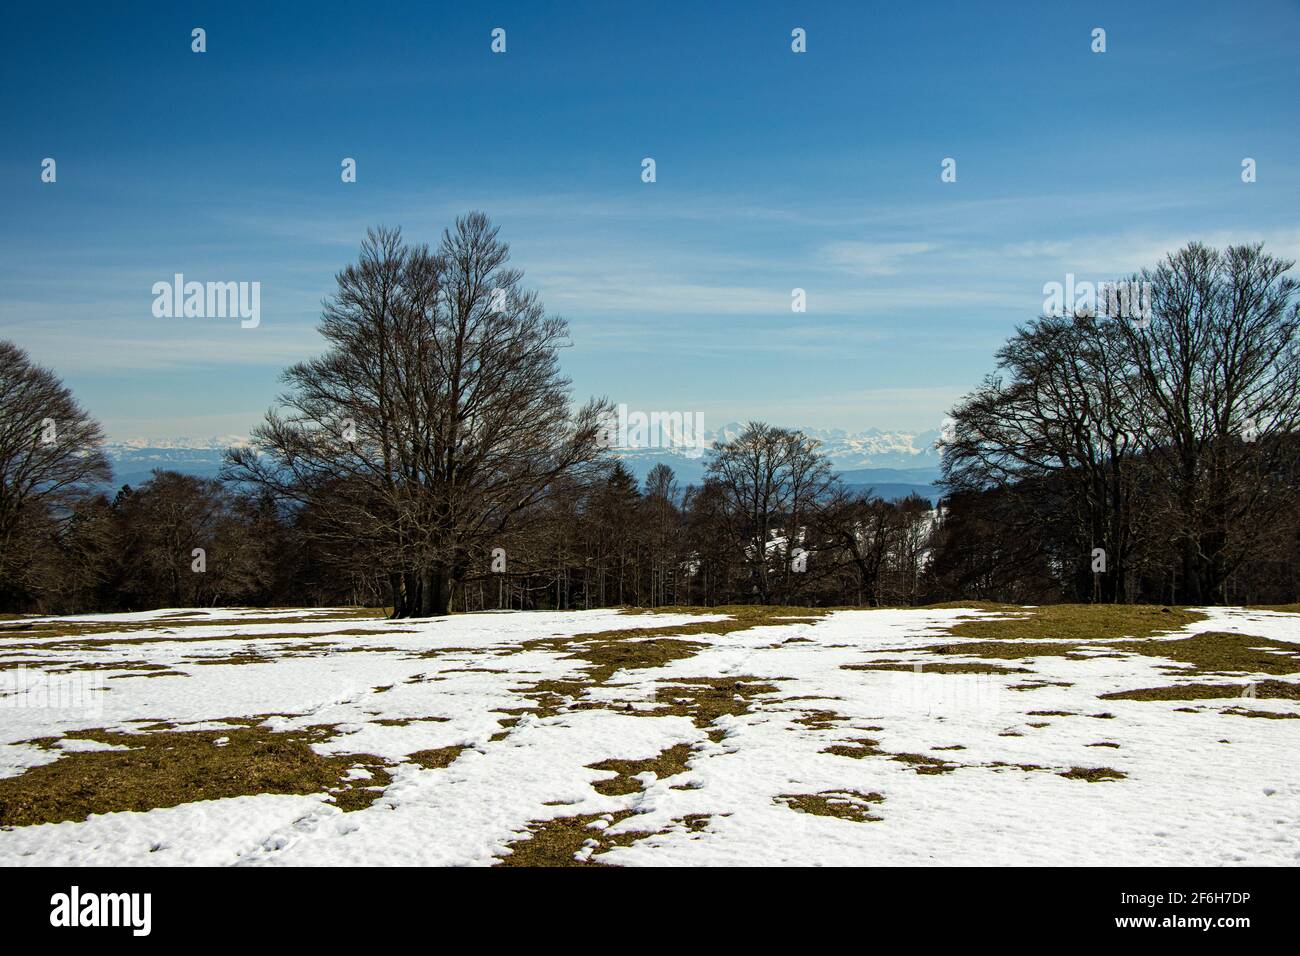 Jurassic mountains in spring. Snowy patches on a meadow near Prés-d-Orvin, Switzerland. Stock Photo